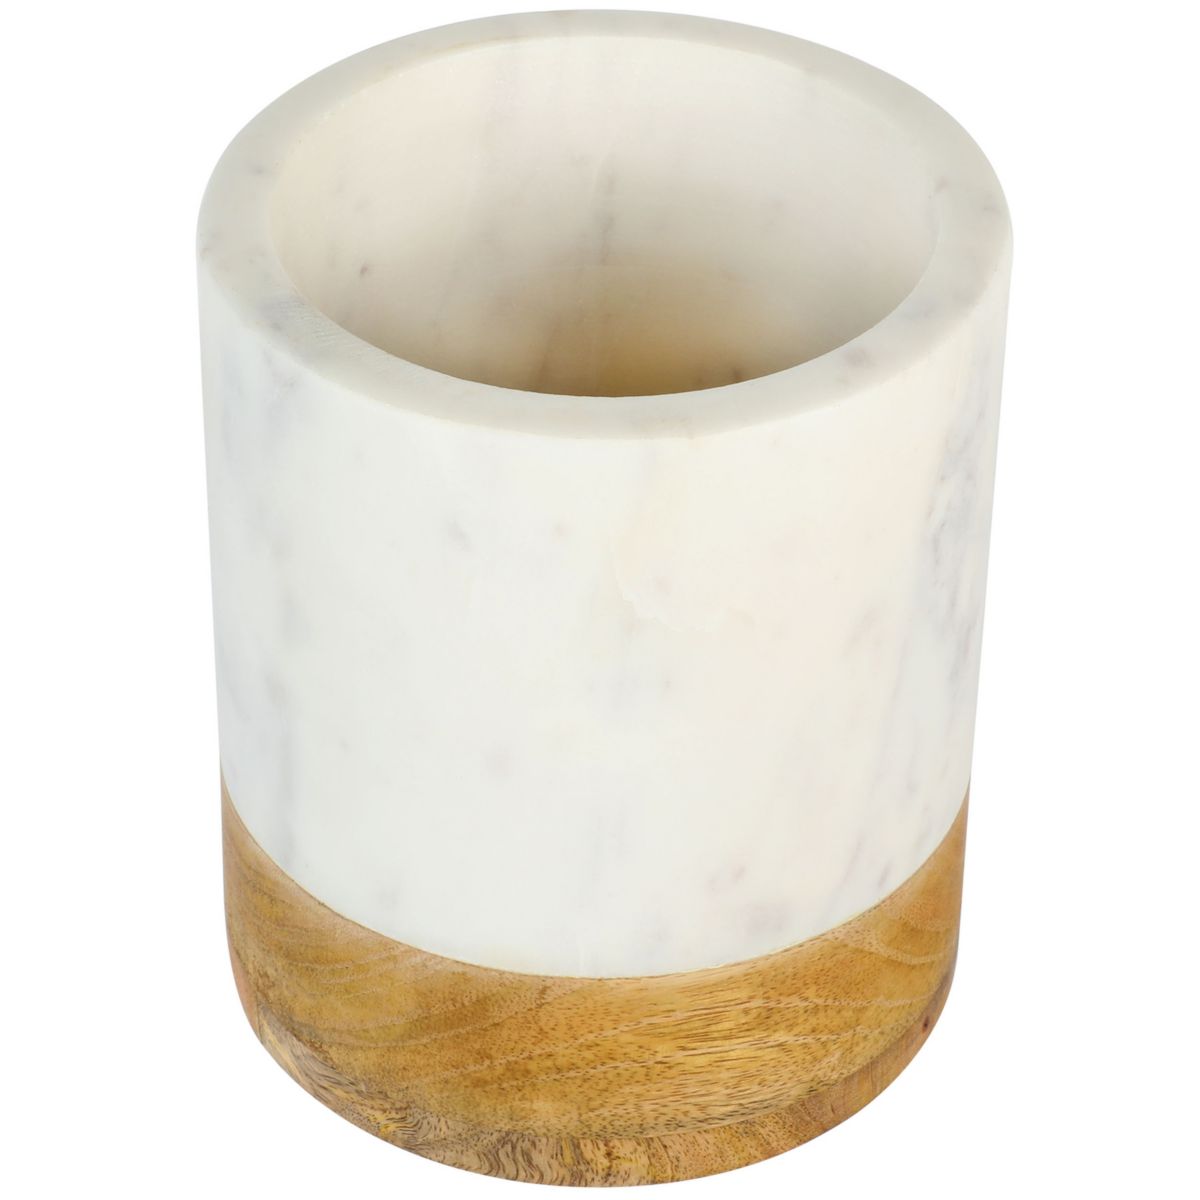 Laurie Gates California Designs 6.5 Inch White Marble and Mango Wood Utensil Crock Laurie Gates